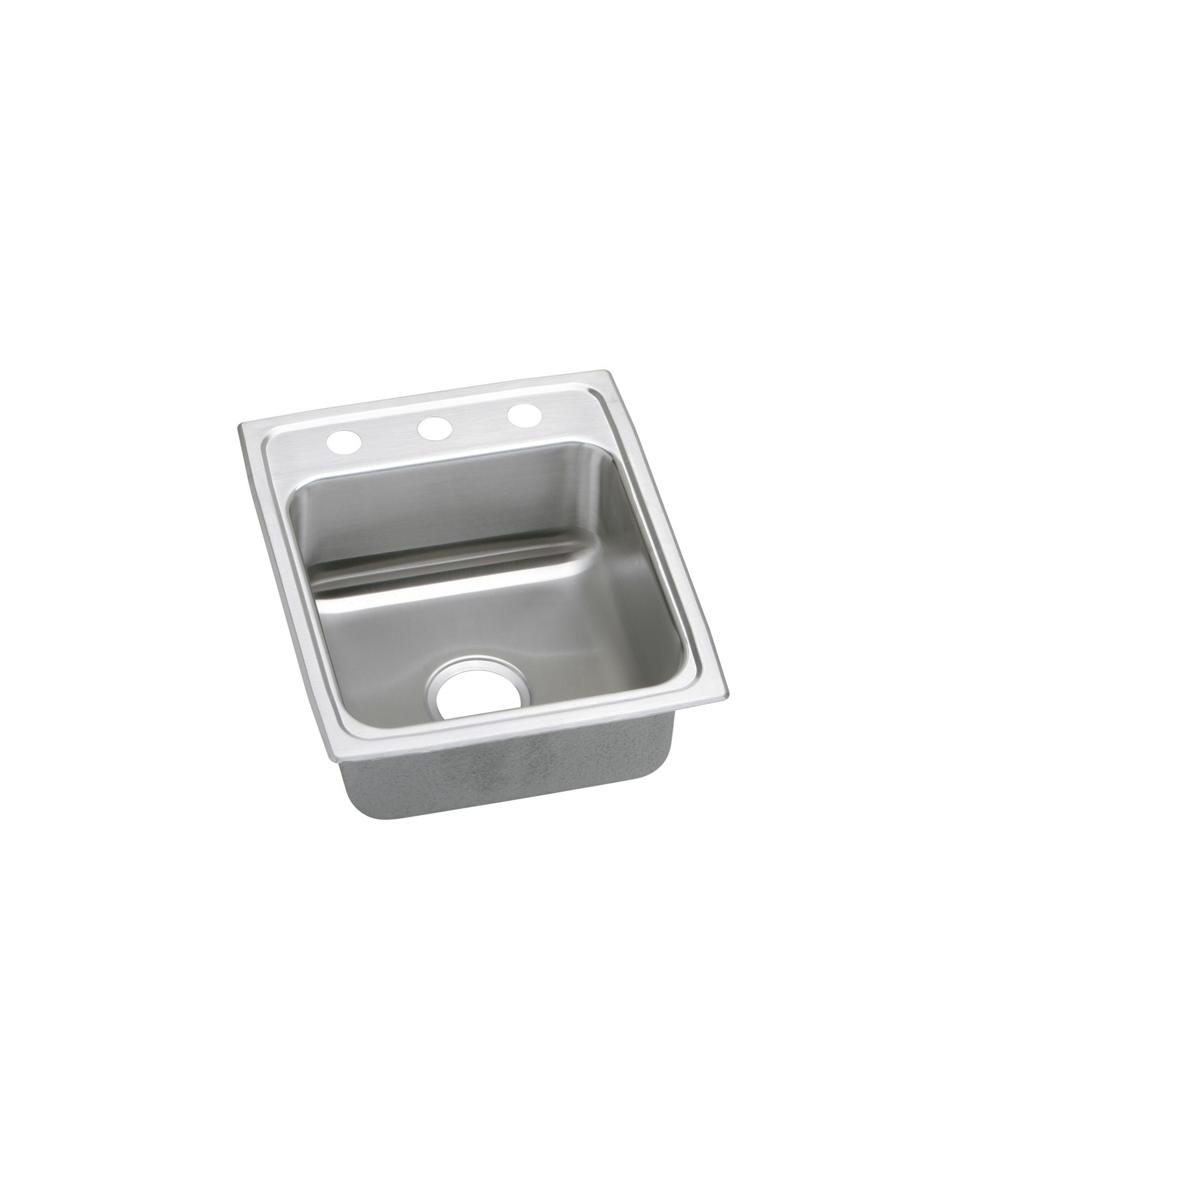 Elkay Lustertone Classic 17" x 20" x 6-1/2" MR2-Hole Single Bowl Drop-in ADA Sink with Quick-clip